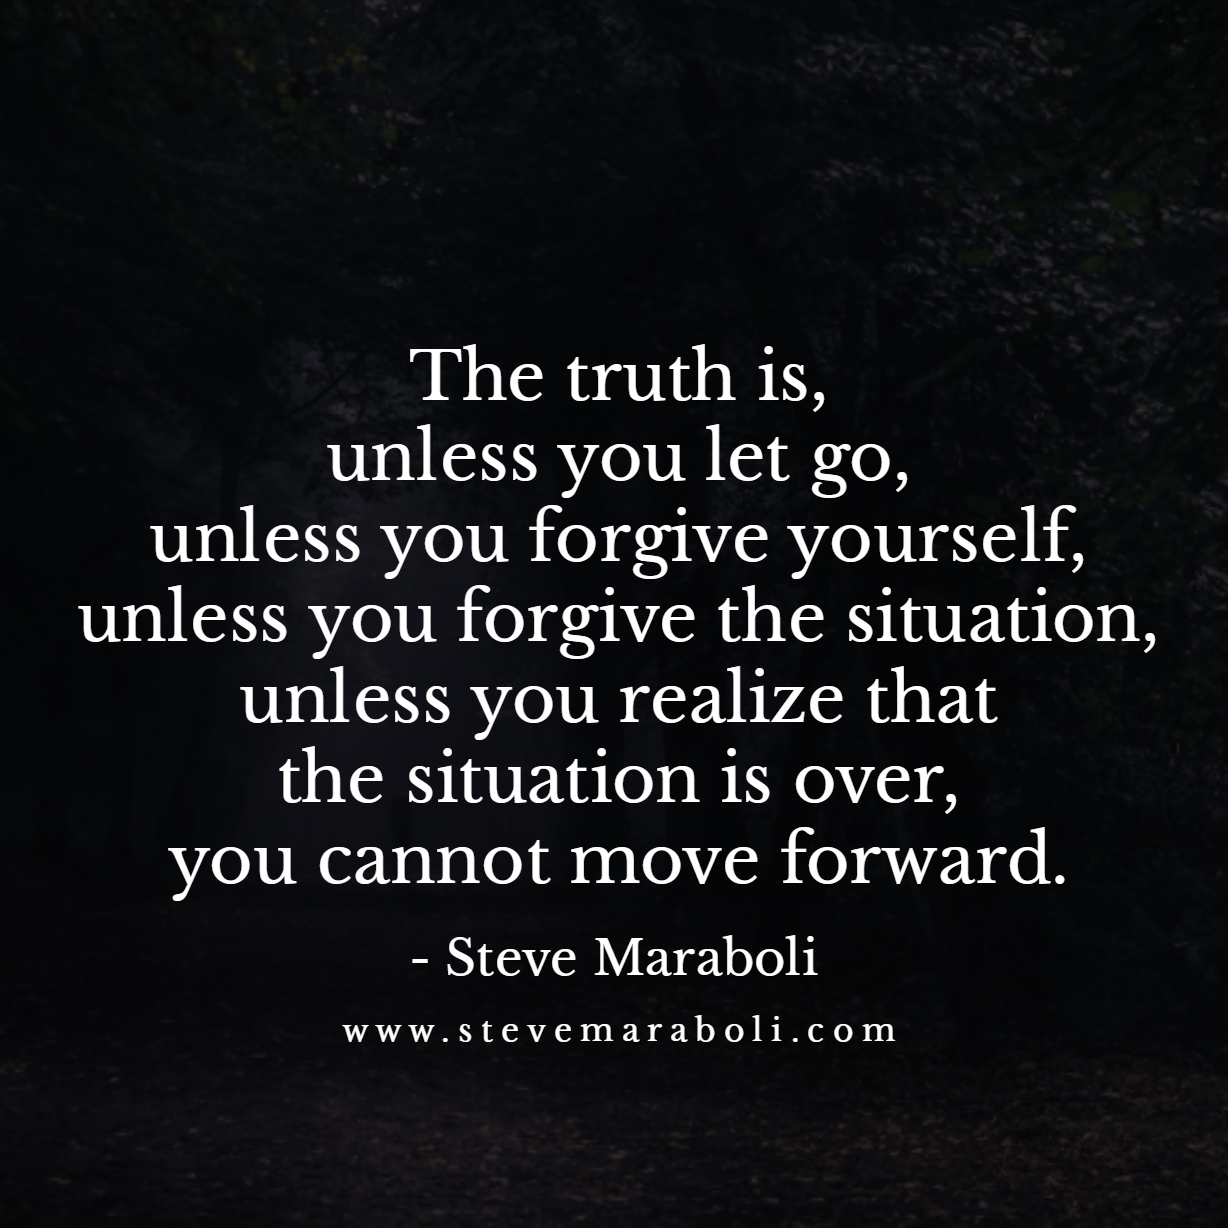 27 Quotes by Steve Maraboli Everyone Should Read - A Better Today Media